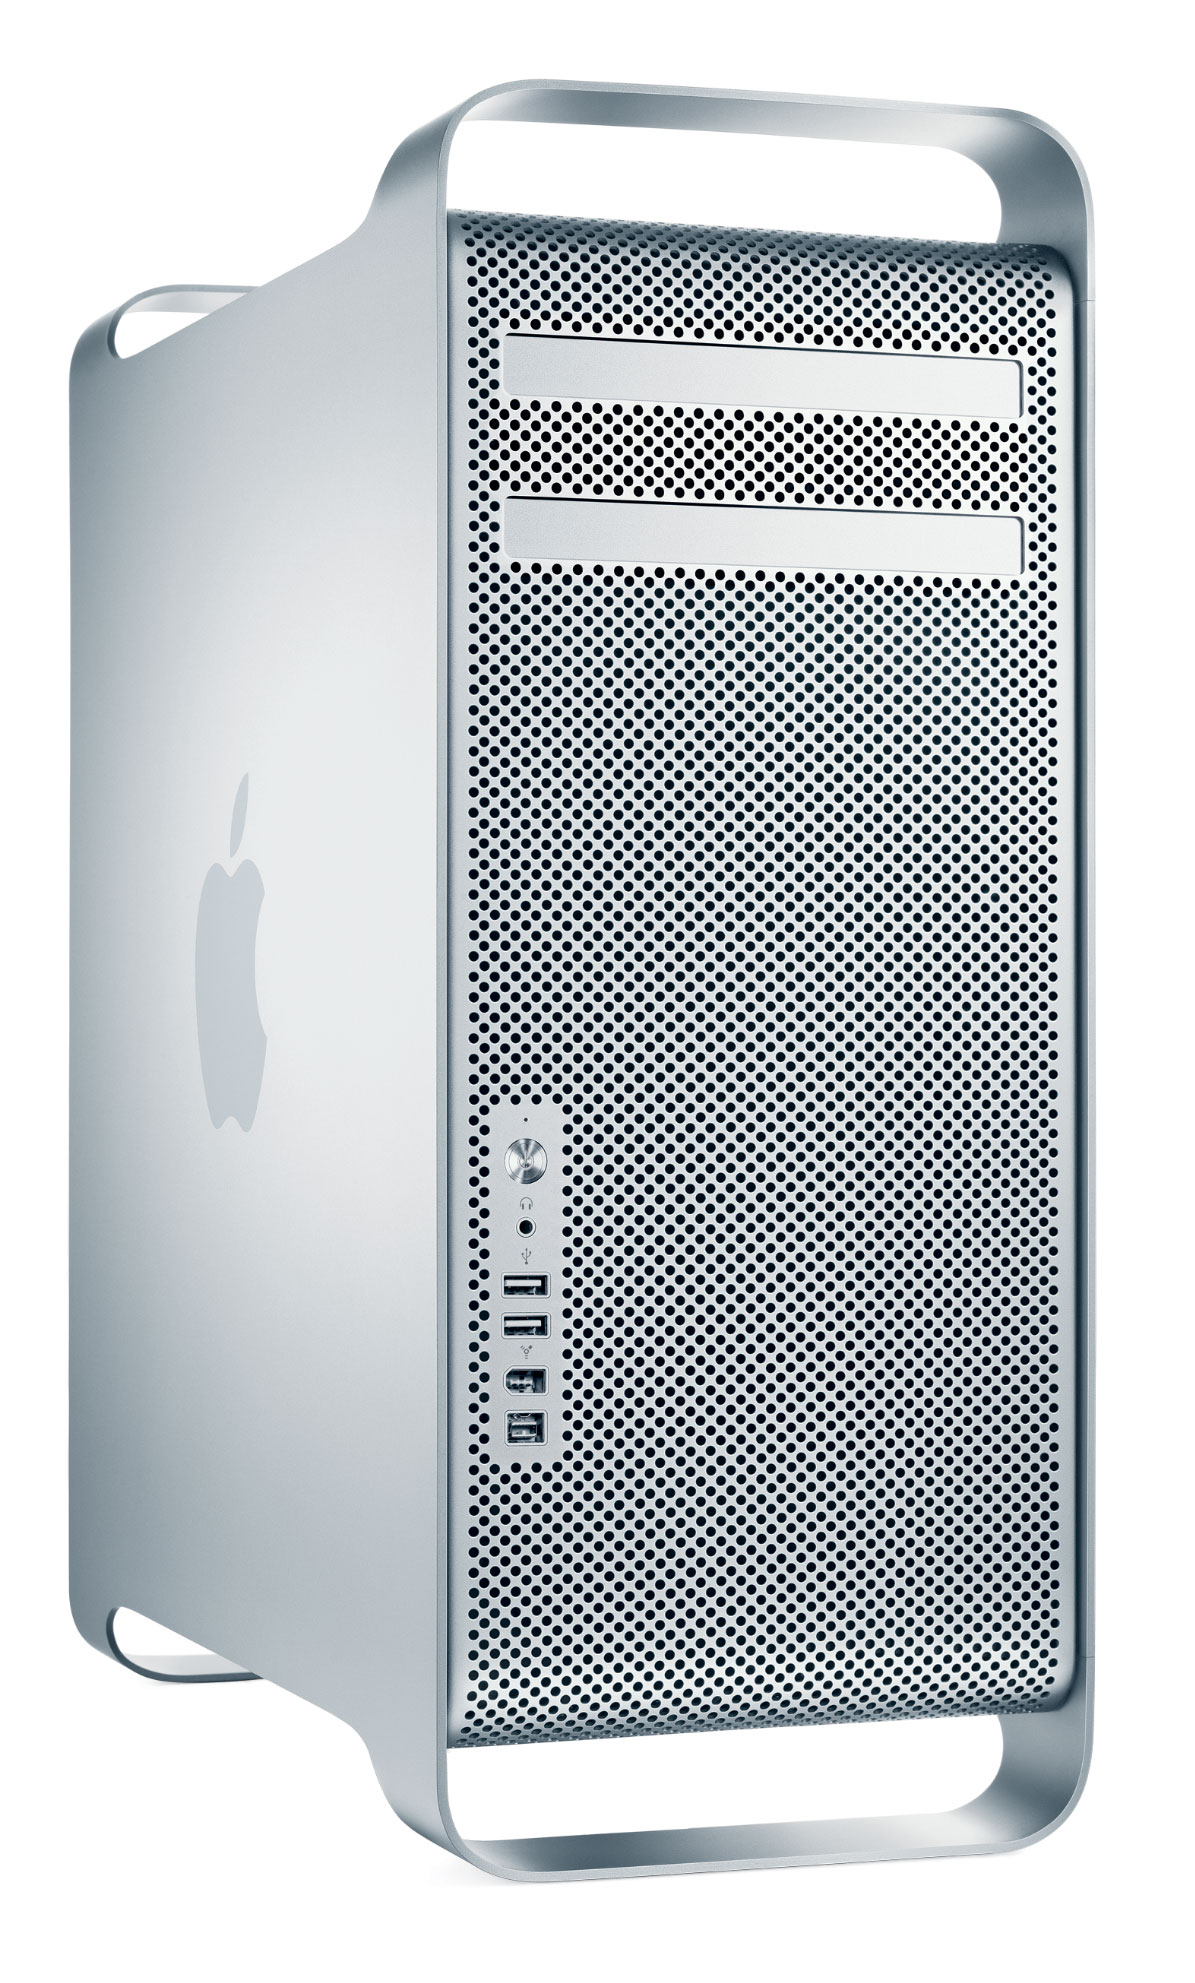 Mac Pro Cases and Parts - 2019